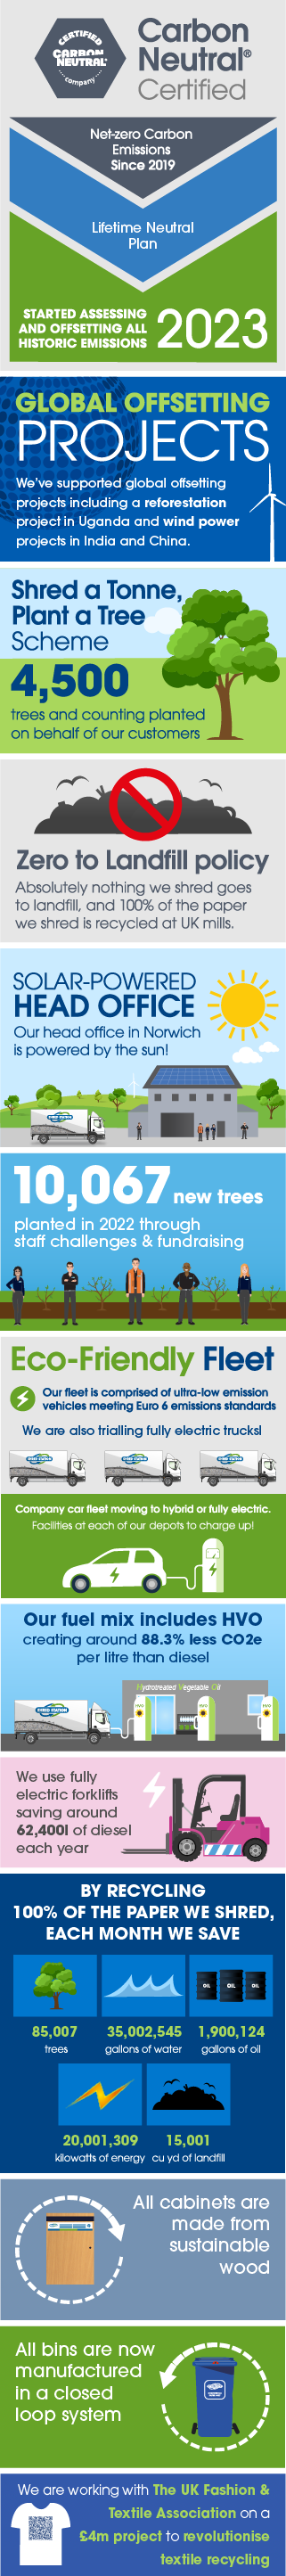 Carbon offset infographic - small